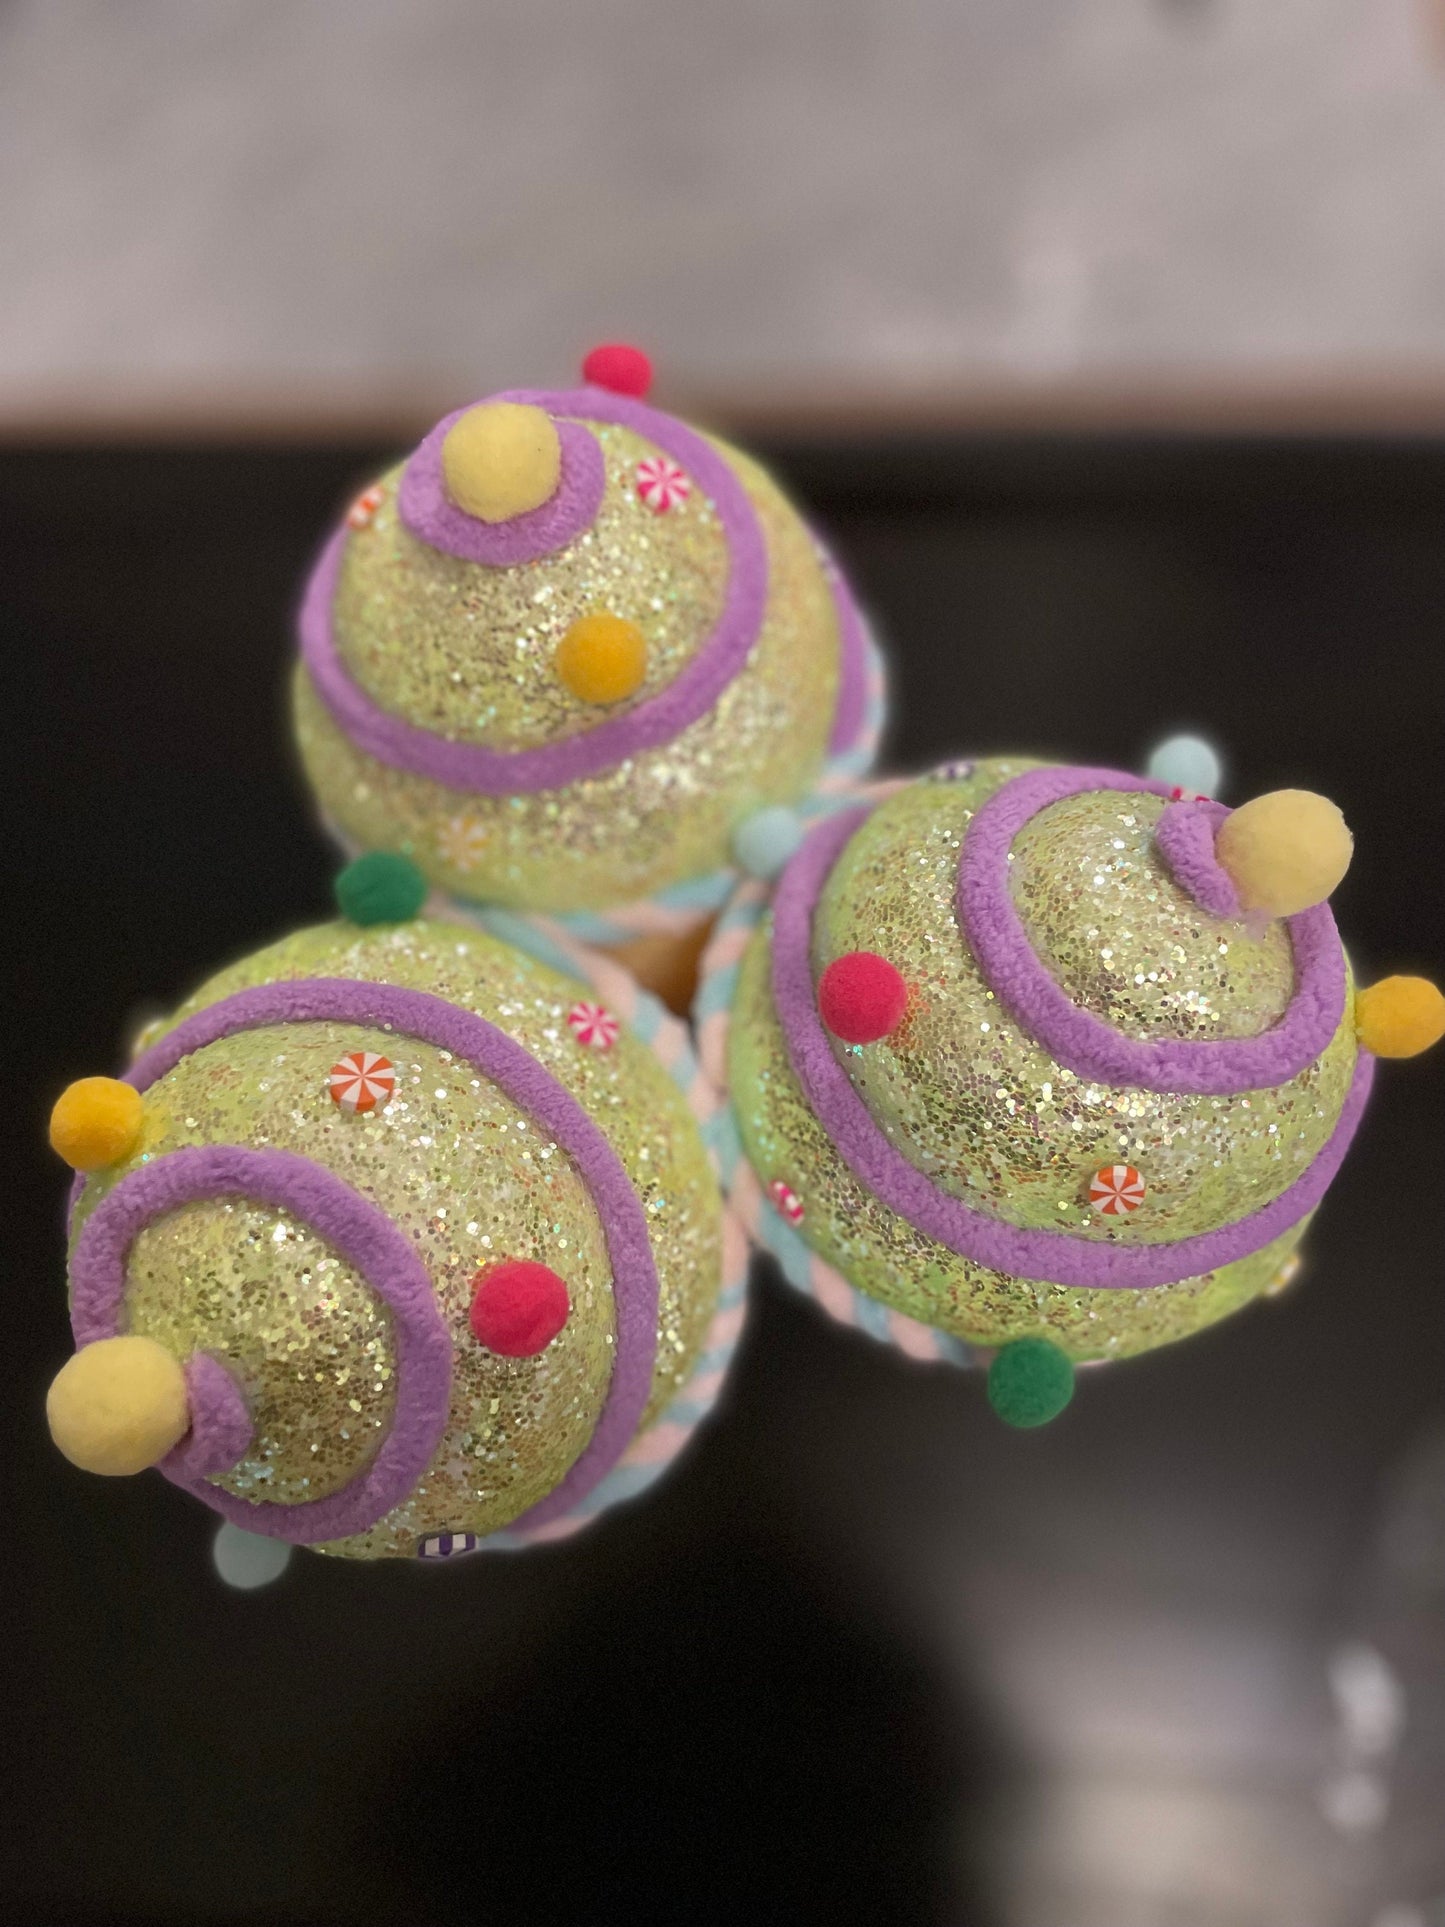 6.5” Light yellow Cupcake with sprinkles ornament. Set of 3.